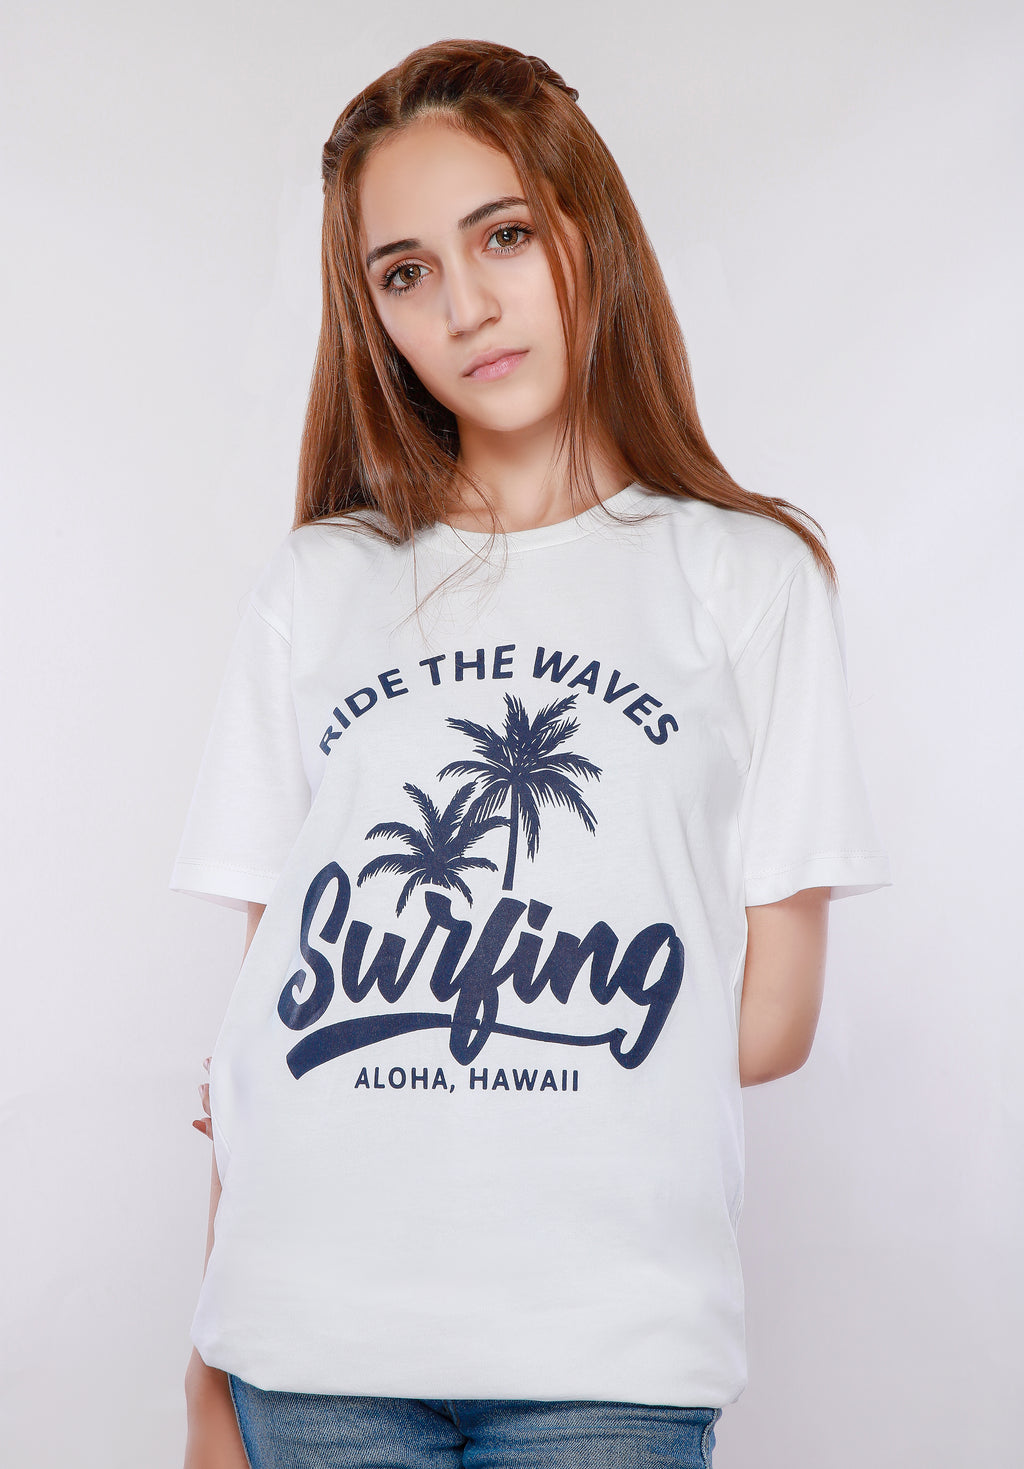 Surfing - Ride the waves Graphic Tee